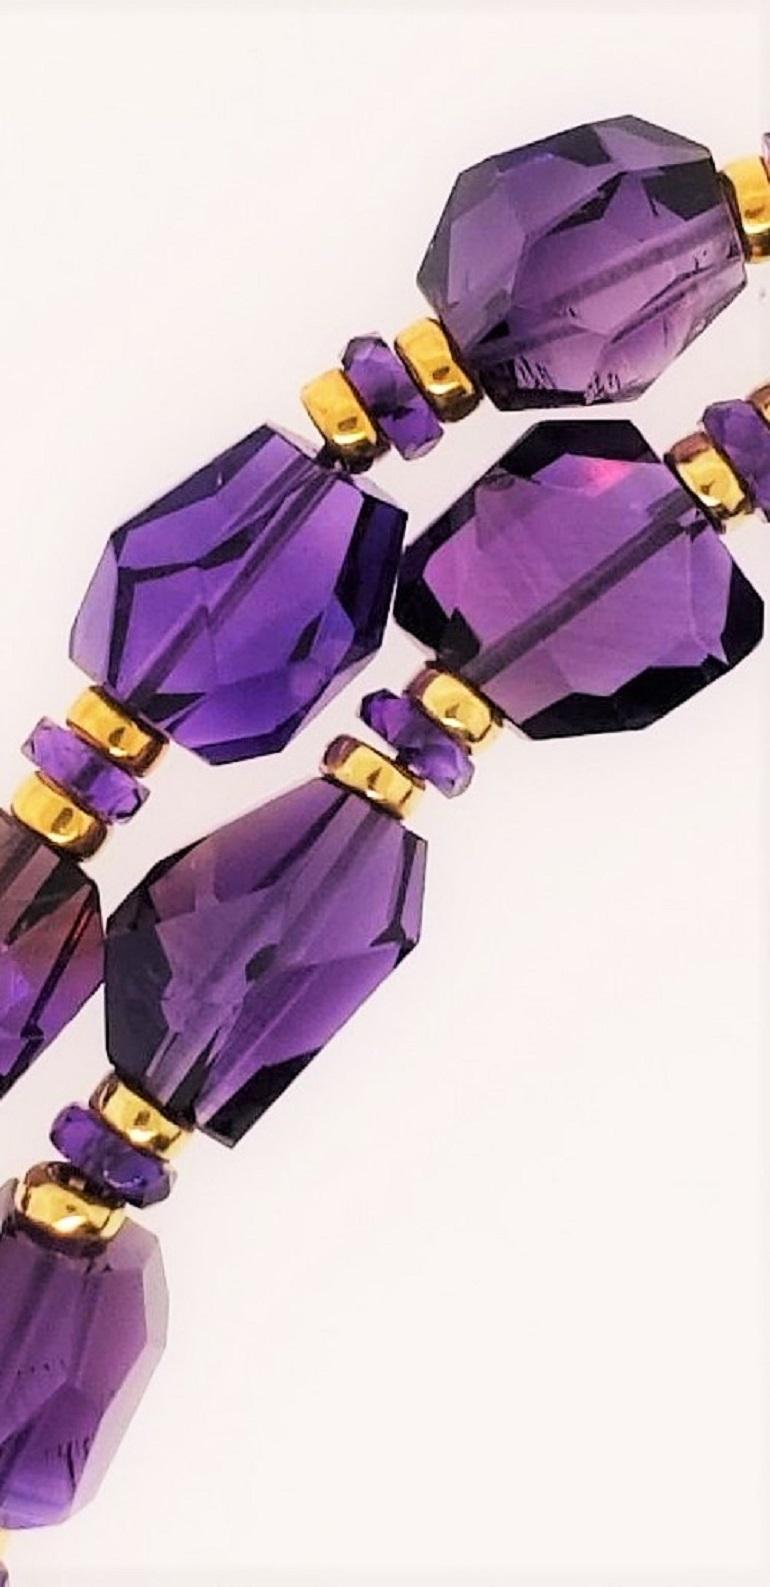 Brought in from our factory in Idar Oberstein Germany, this necklace made of hand cut Amethyst beads is truly beautiful.  Featuring a dark but soothing shade of purple, this necklace's beads are separated by two 18 Karat gold roundels with an